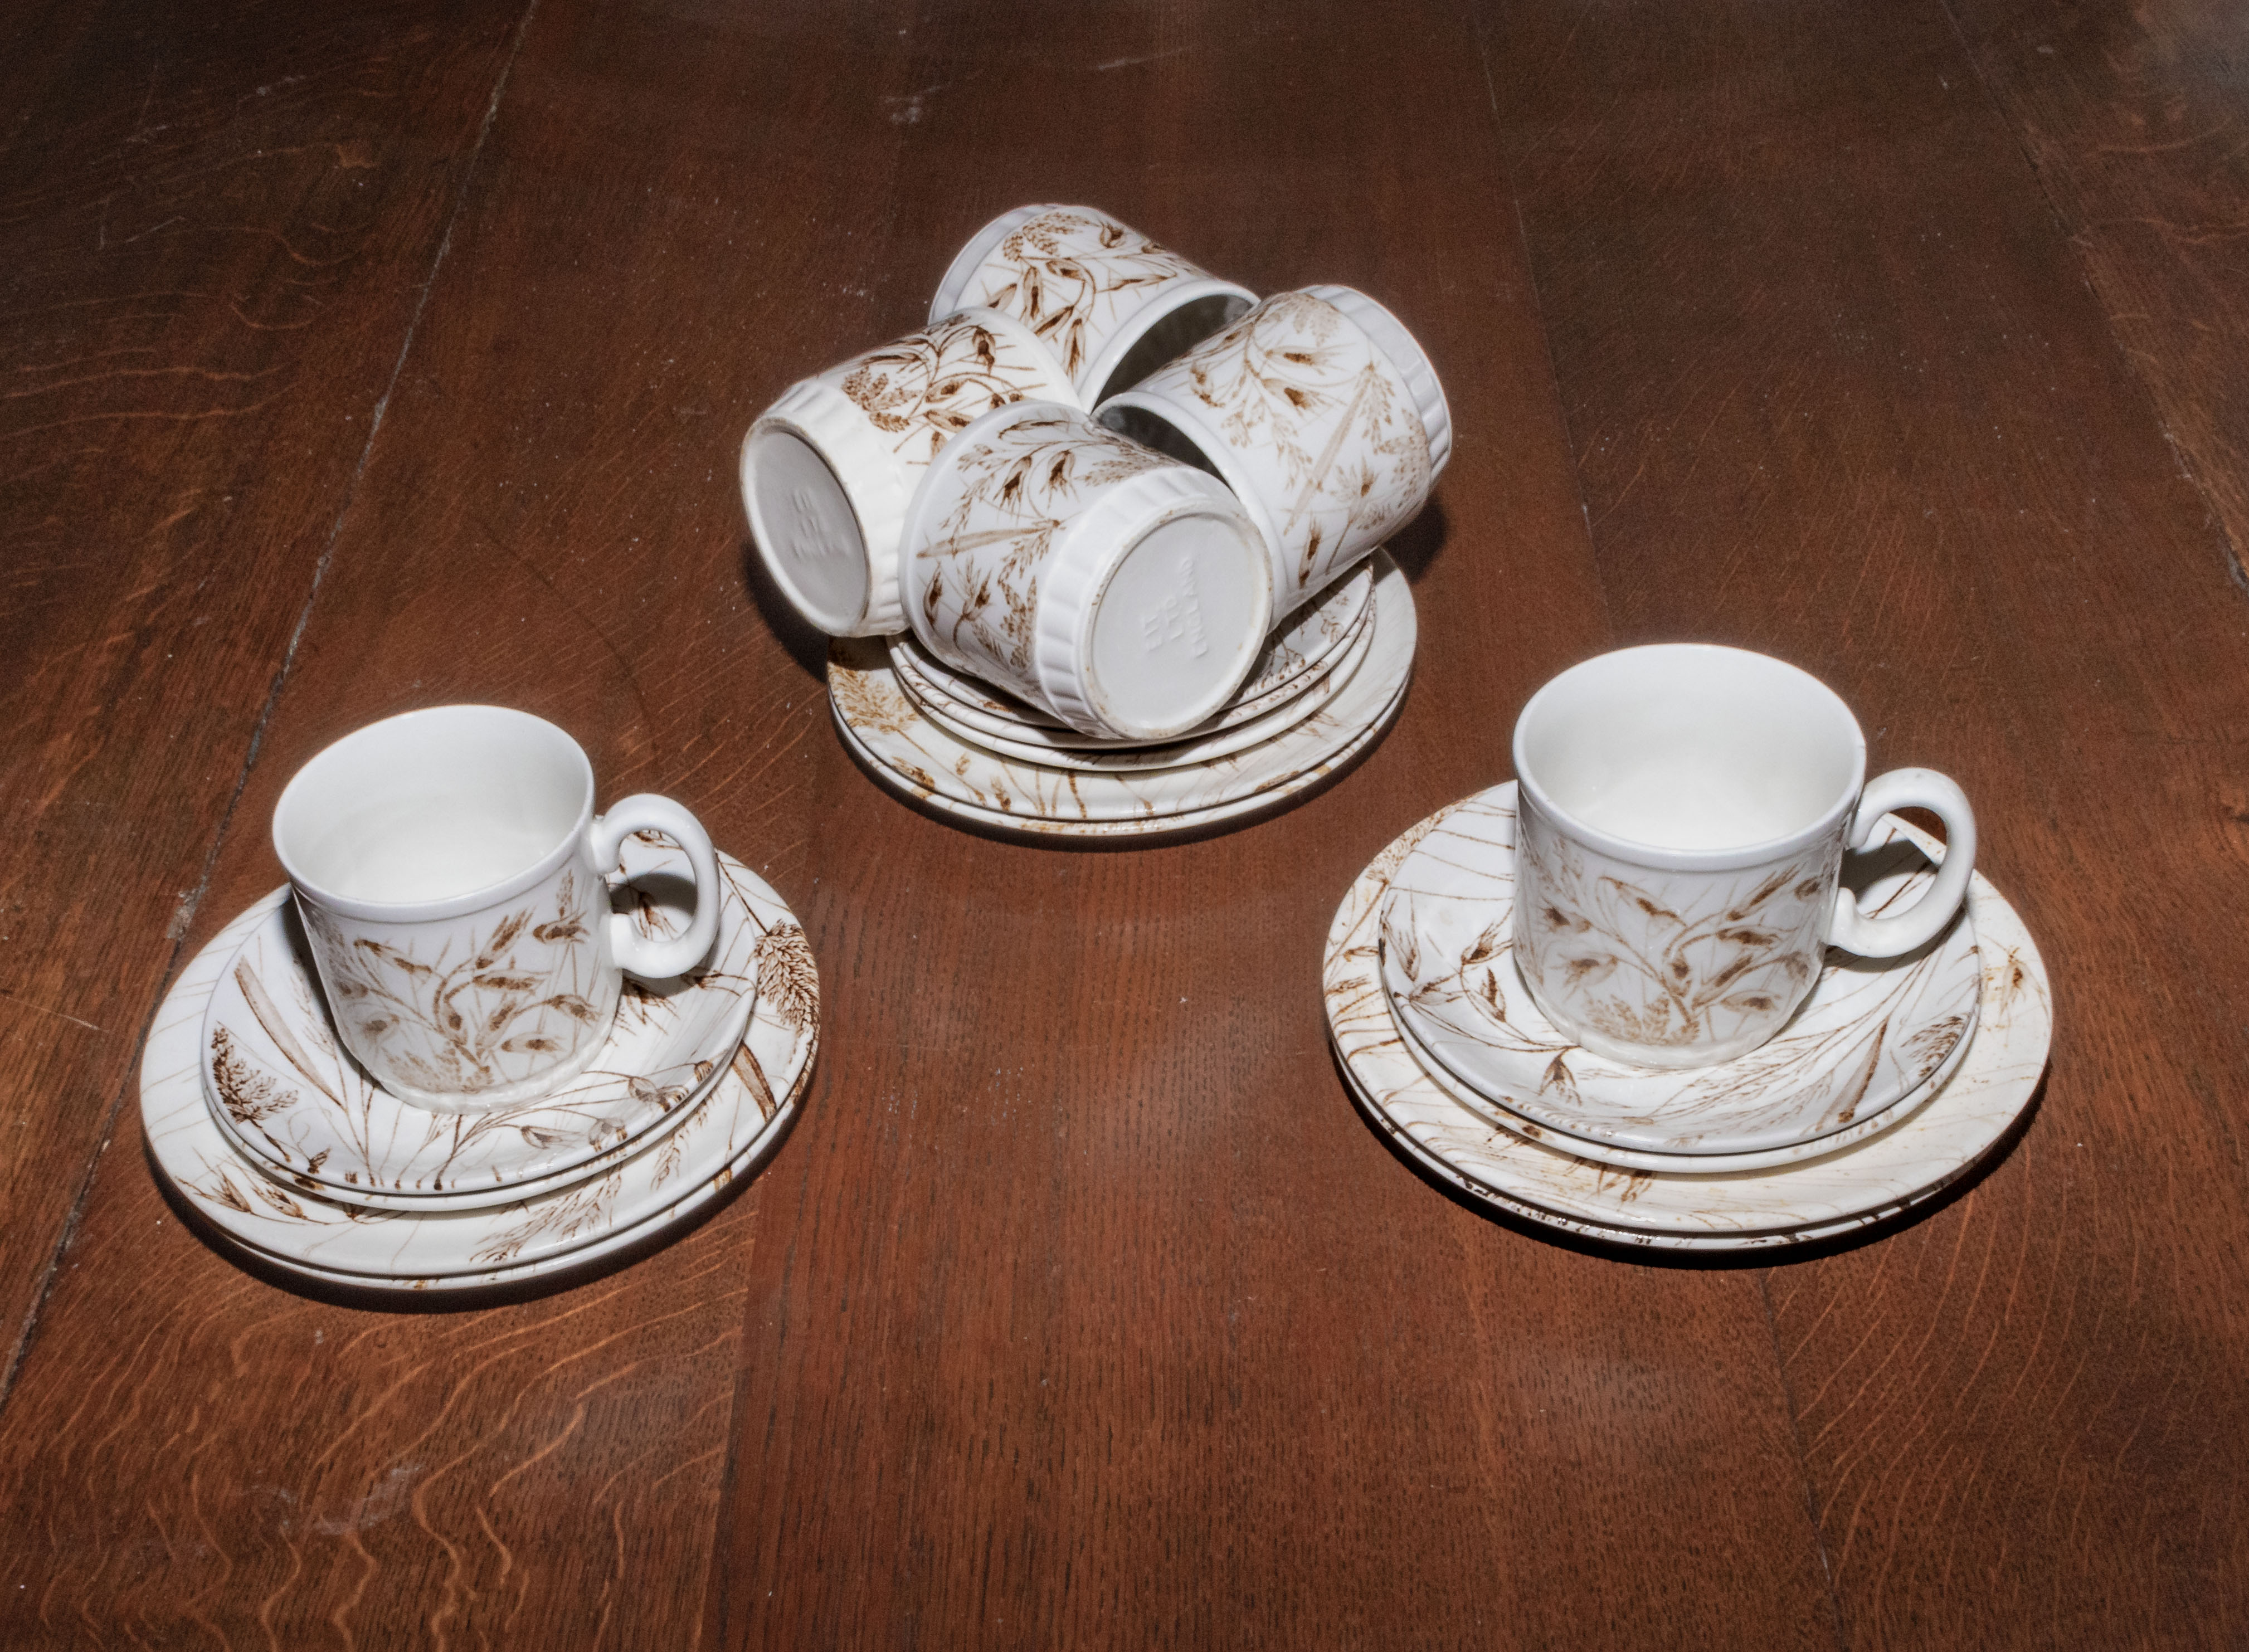 Six Ironstone tableware tea cups, saucers and side plates